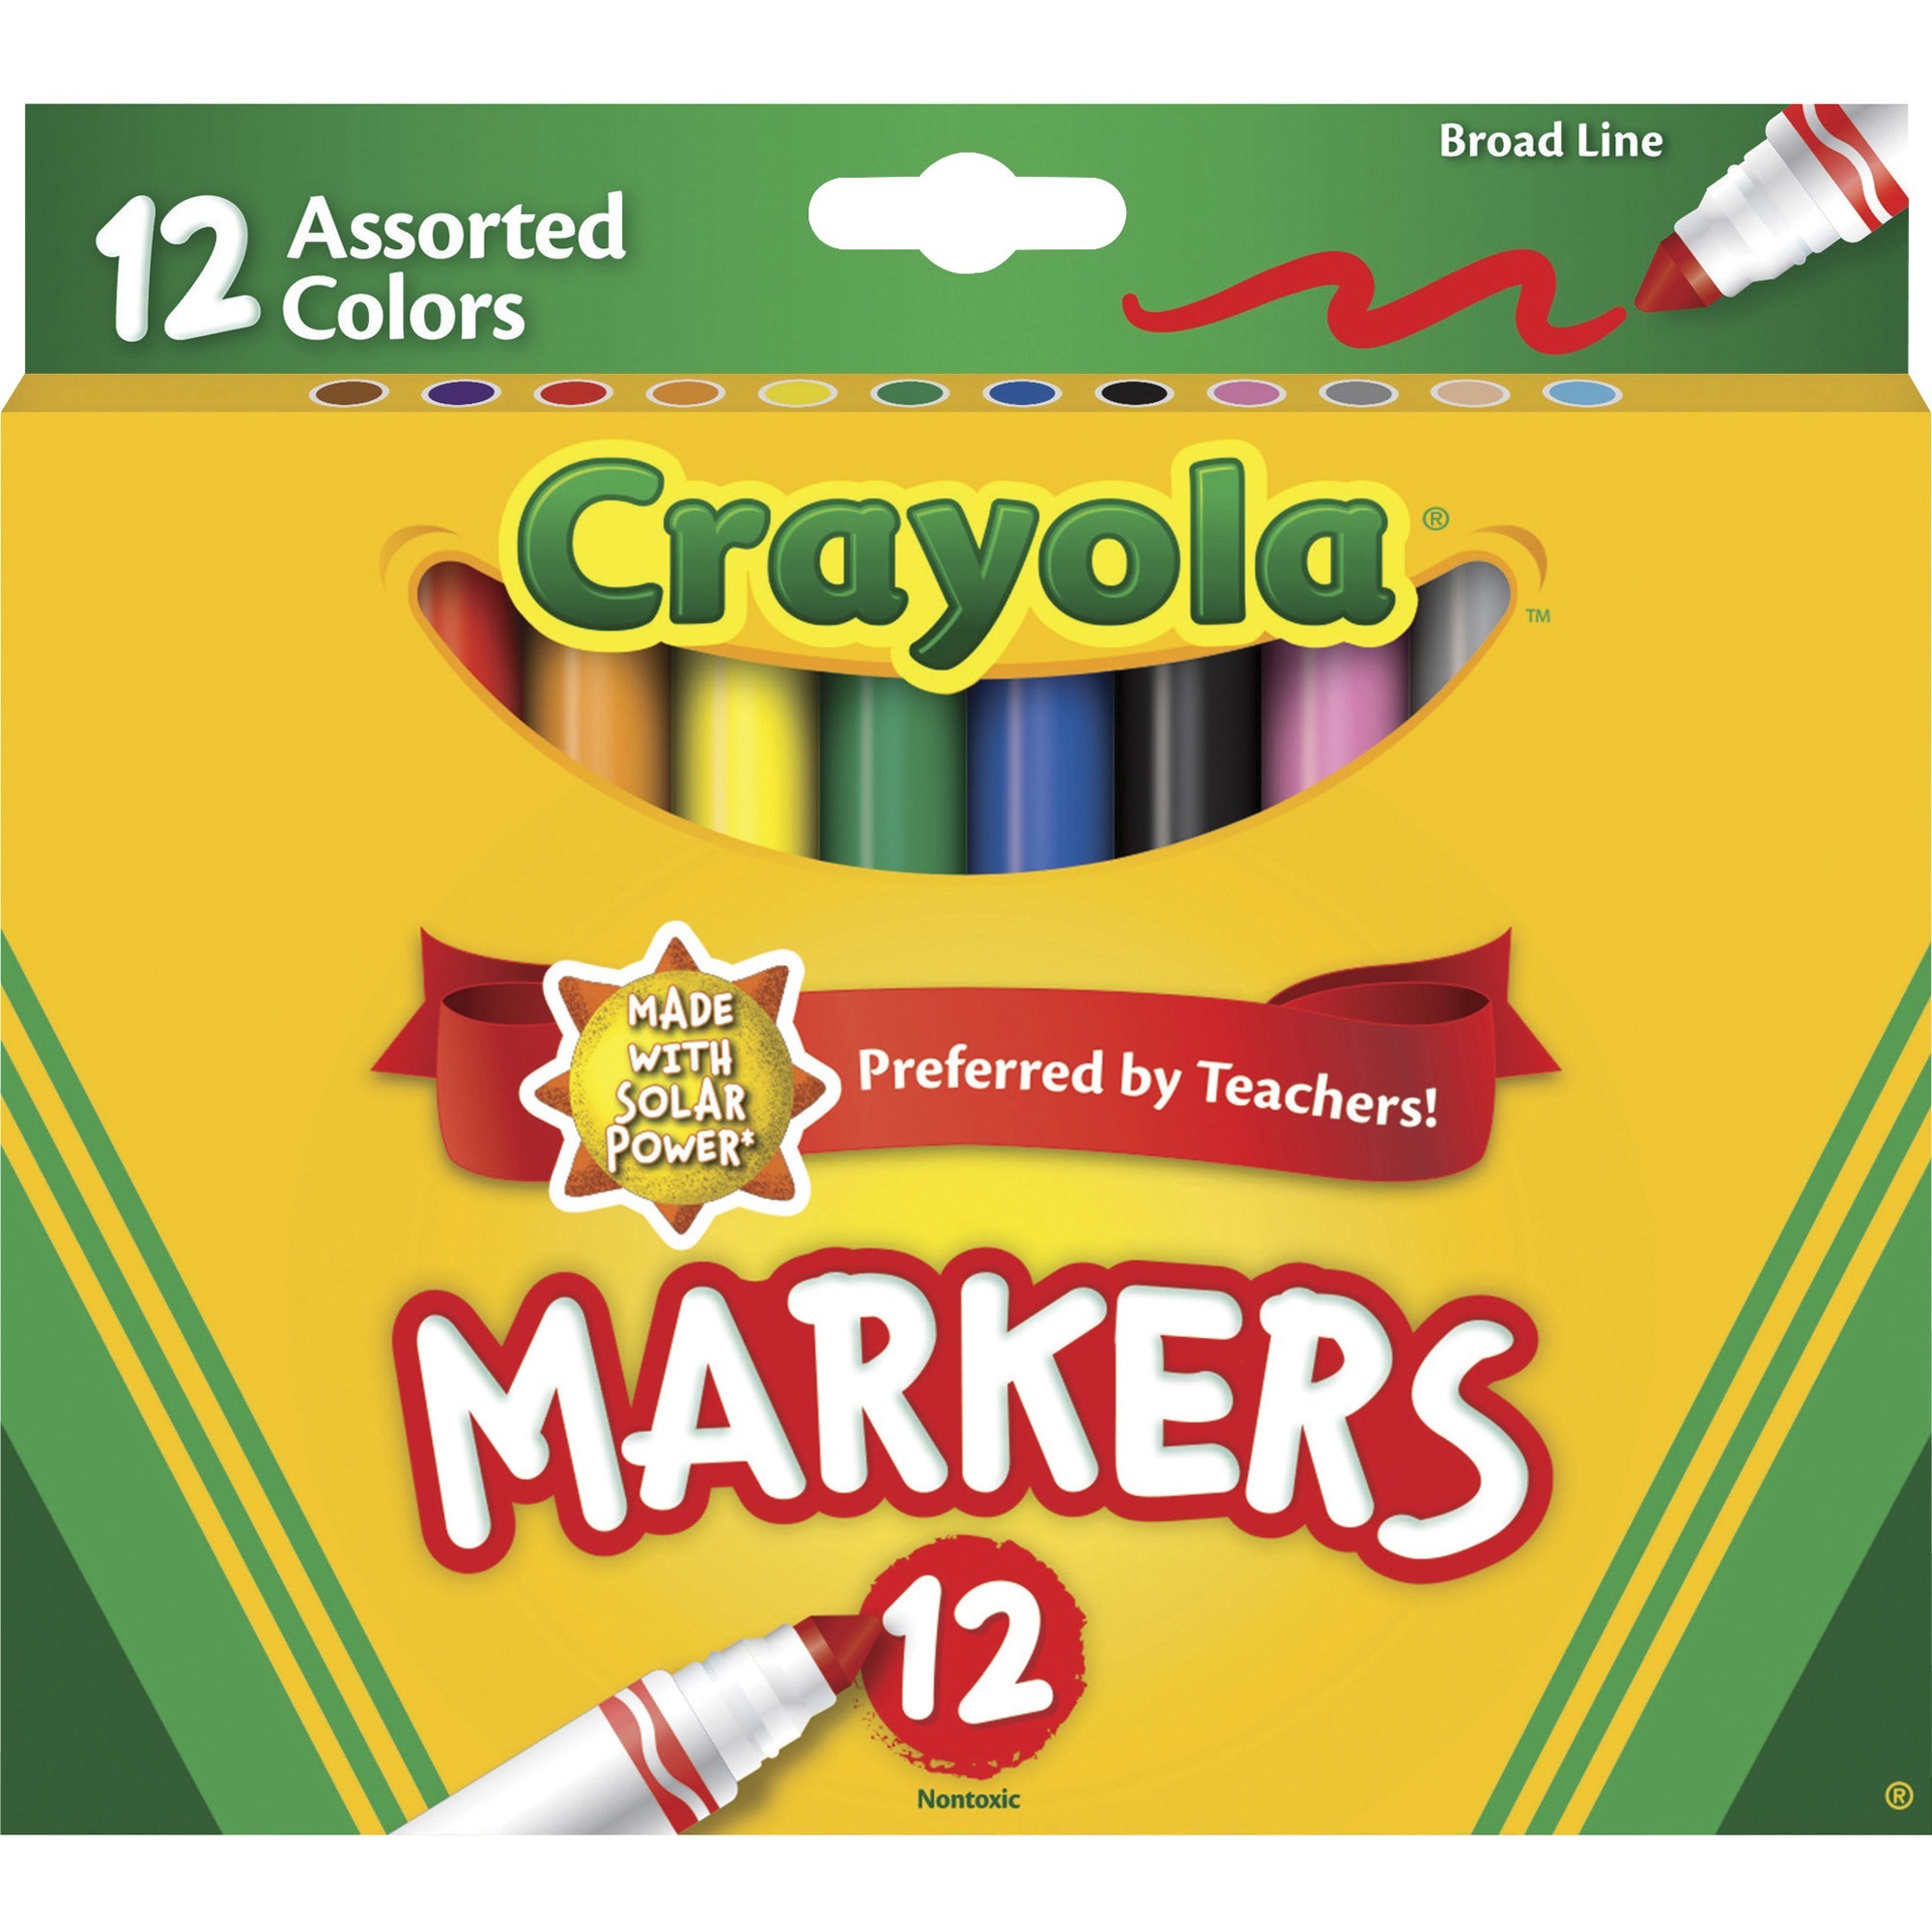 Crayola　Classic　Violet,　Marker　Crayola,　Bl　Colors　Broad　Conical　Point　Broad　Brown,　Marker　Line　Orange,　Markers　Markers　Green,　Point　Yellow,　ASB　Style　Assorted,　LLC　Blue,　Midsouth